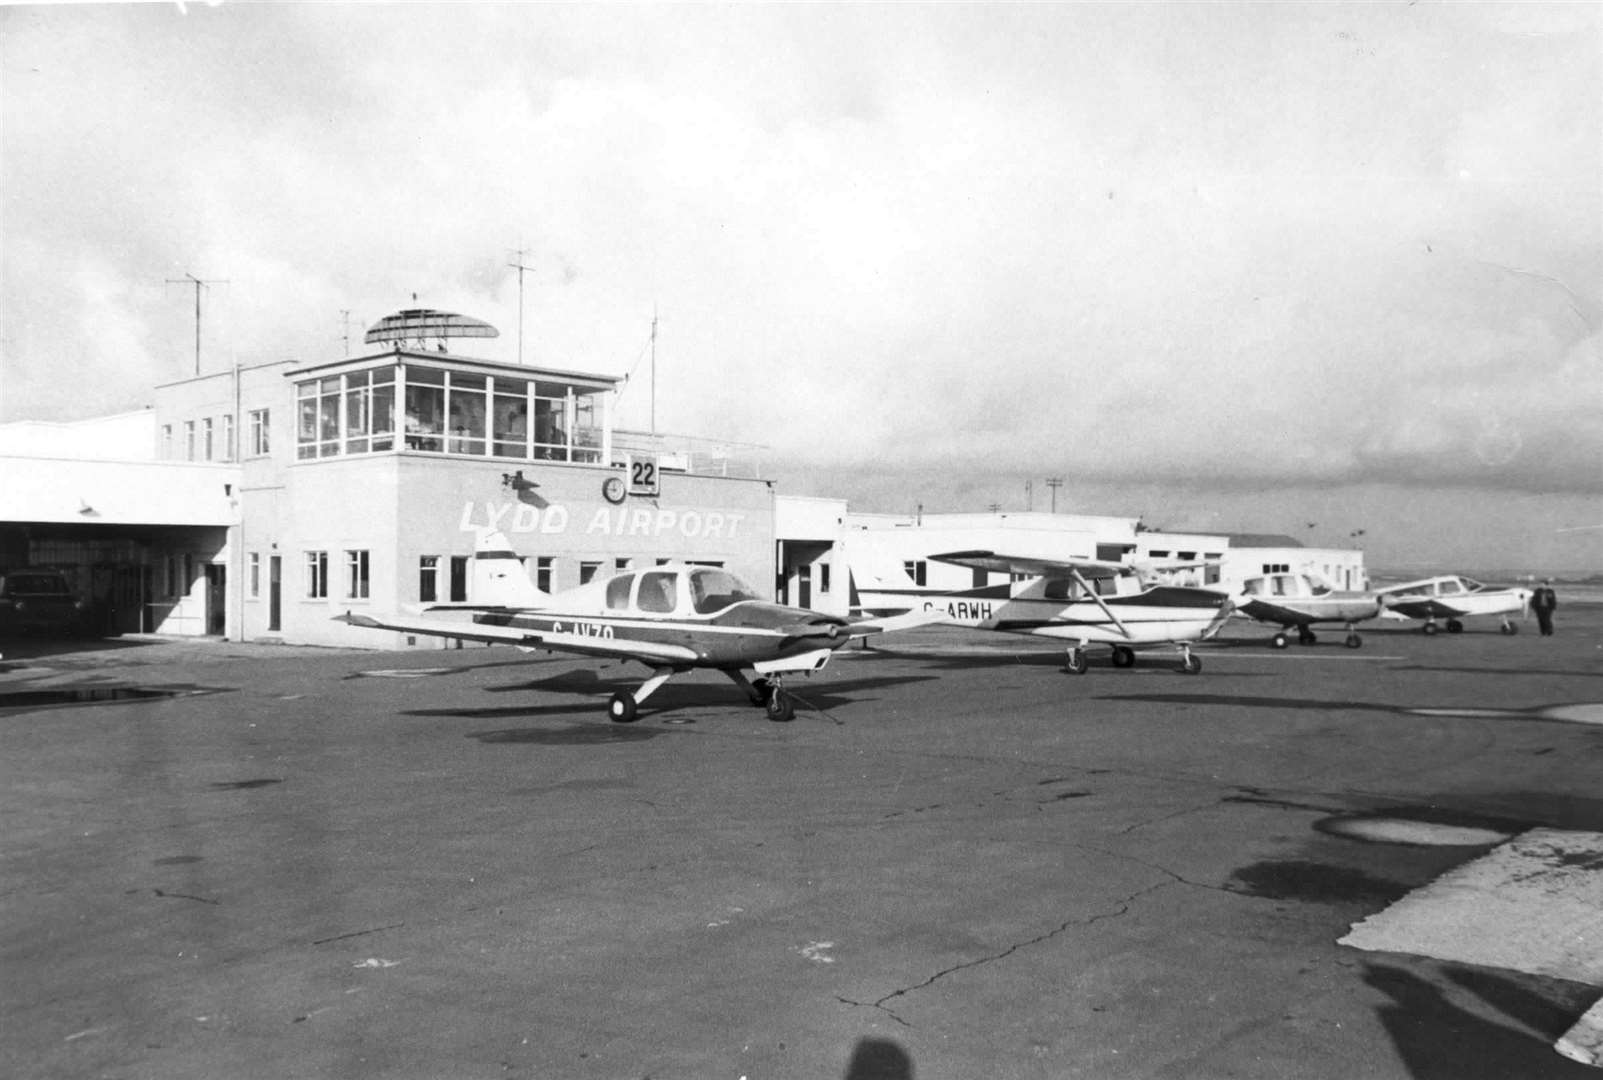 Lydd Airport January 1974